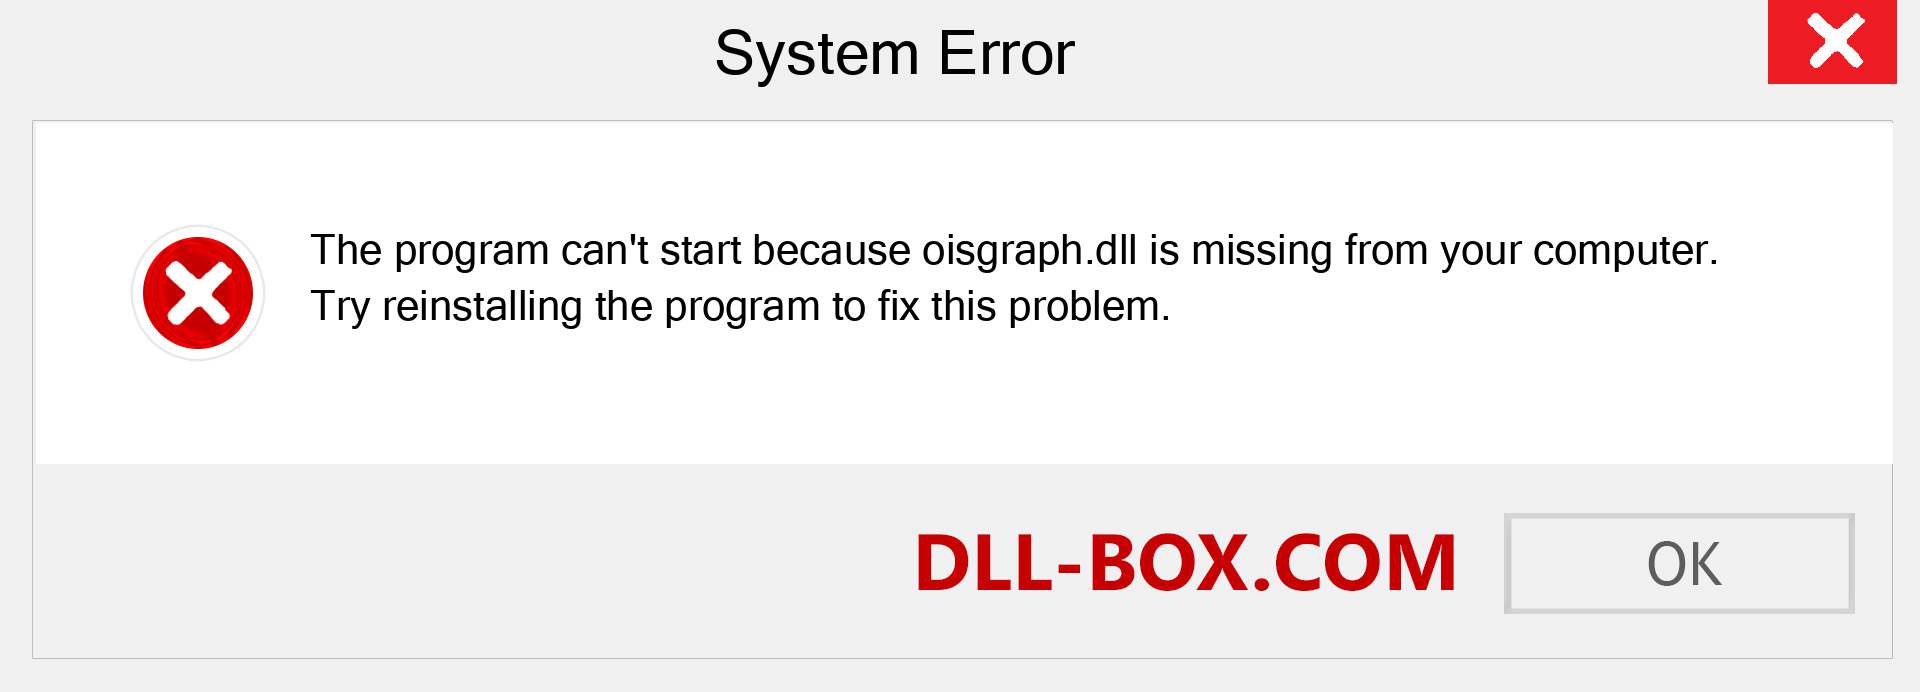  oisgraph.dll file is missing?. Download for Windows 7, 8, 10 - Fix  oisgraph dll Missing Error on Windows, photos, images